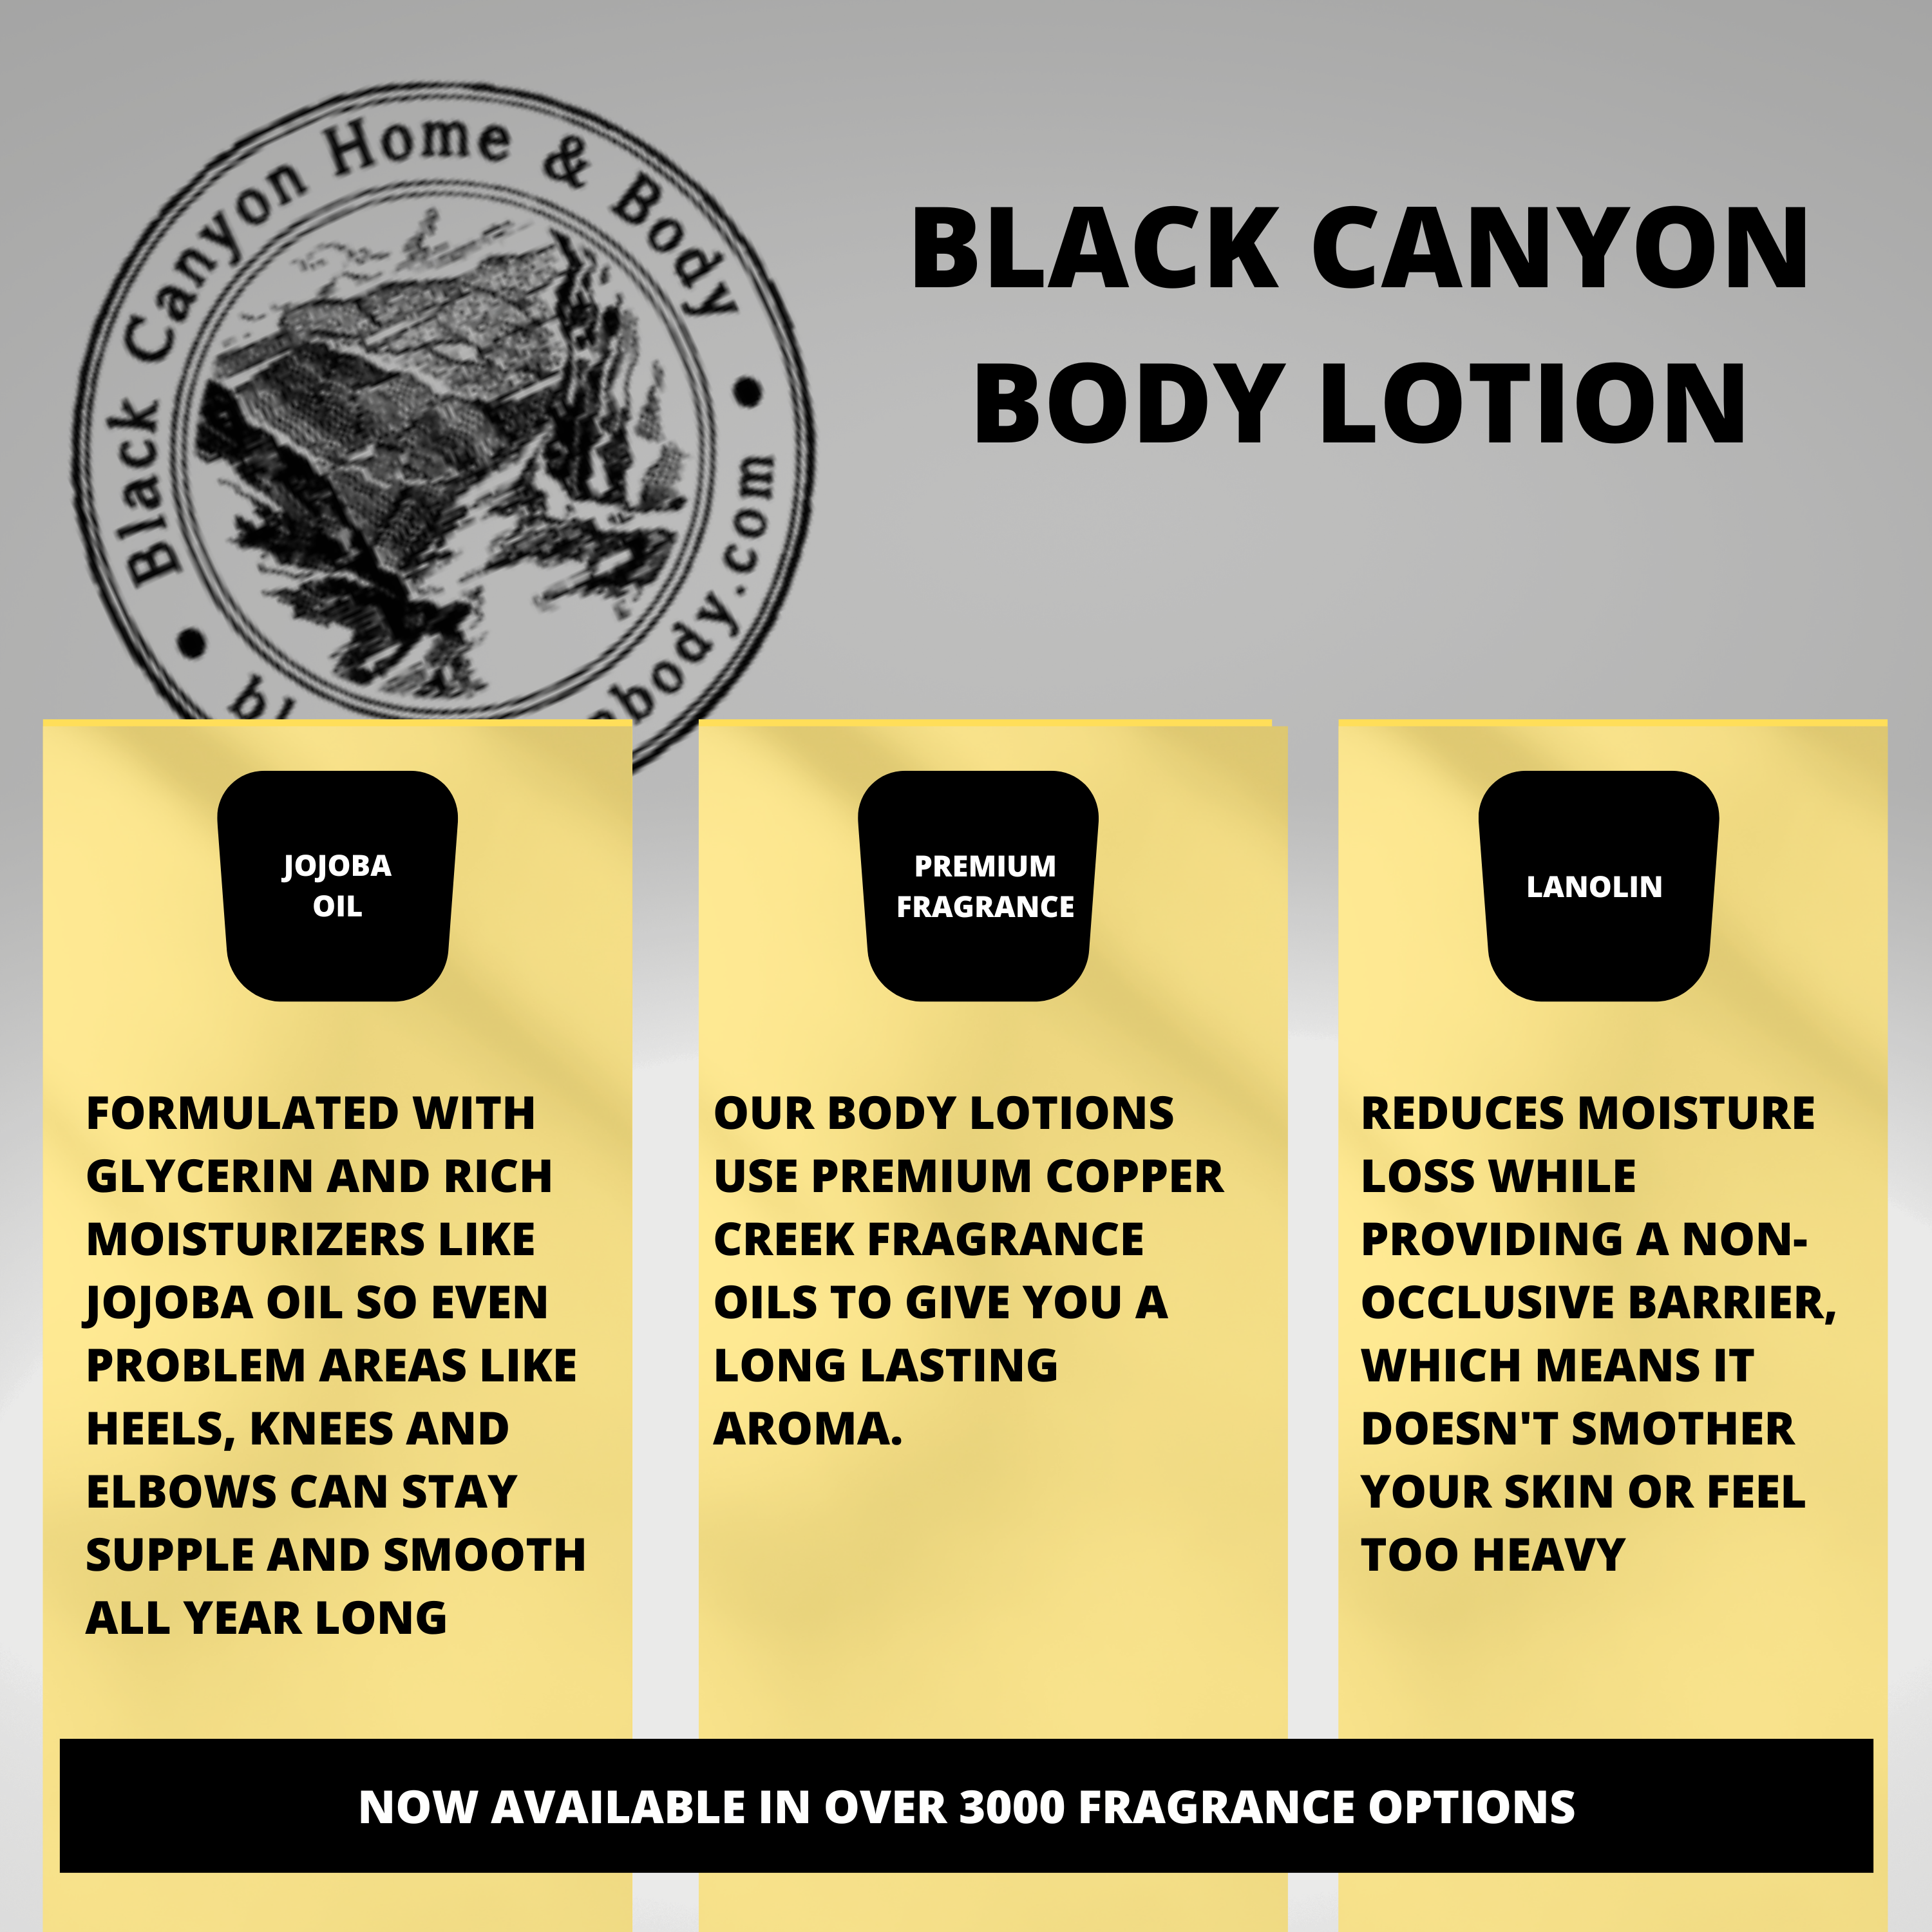 Black Canyon Pumpkin Cider Scented Luxury Body Lotion with Lanolin and Jojoba Oil